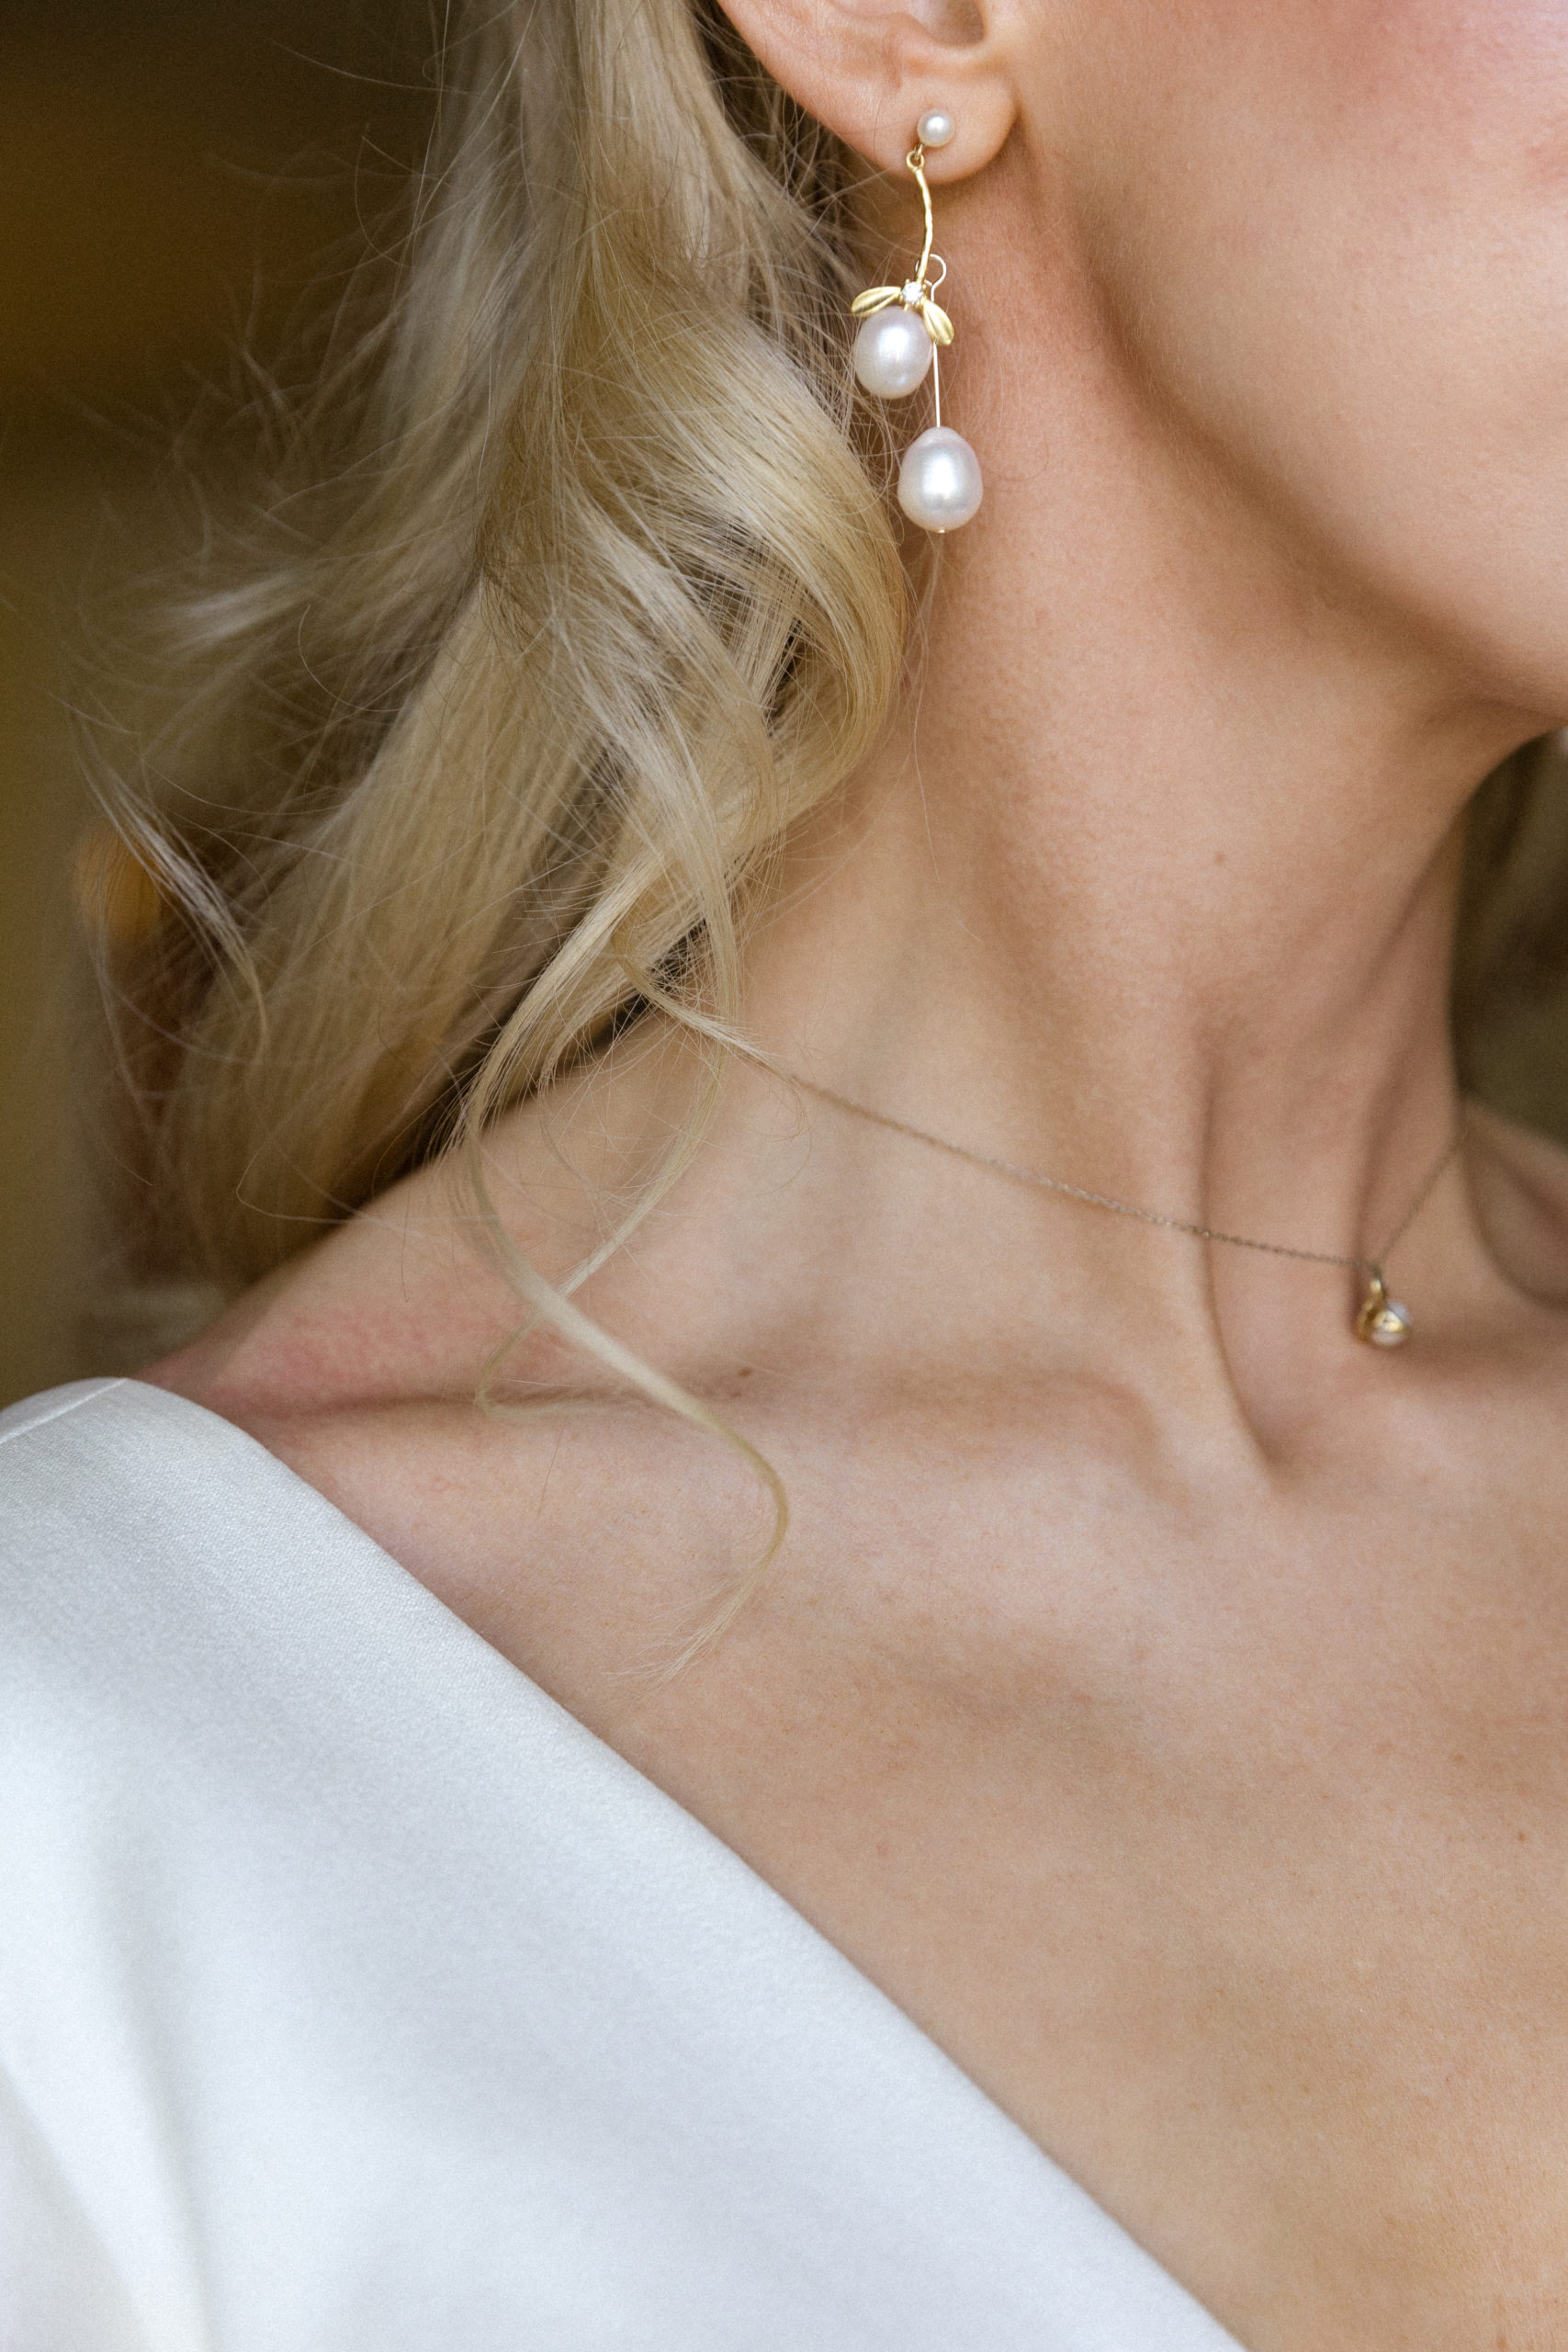 A side photo of an elegantly dressed bride wearing a white dress and dangling earrings